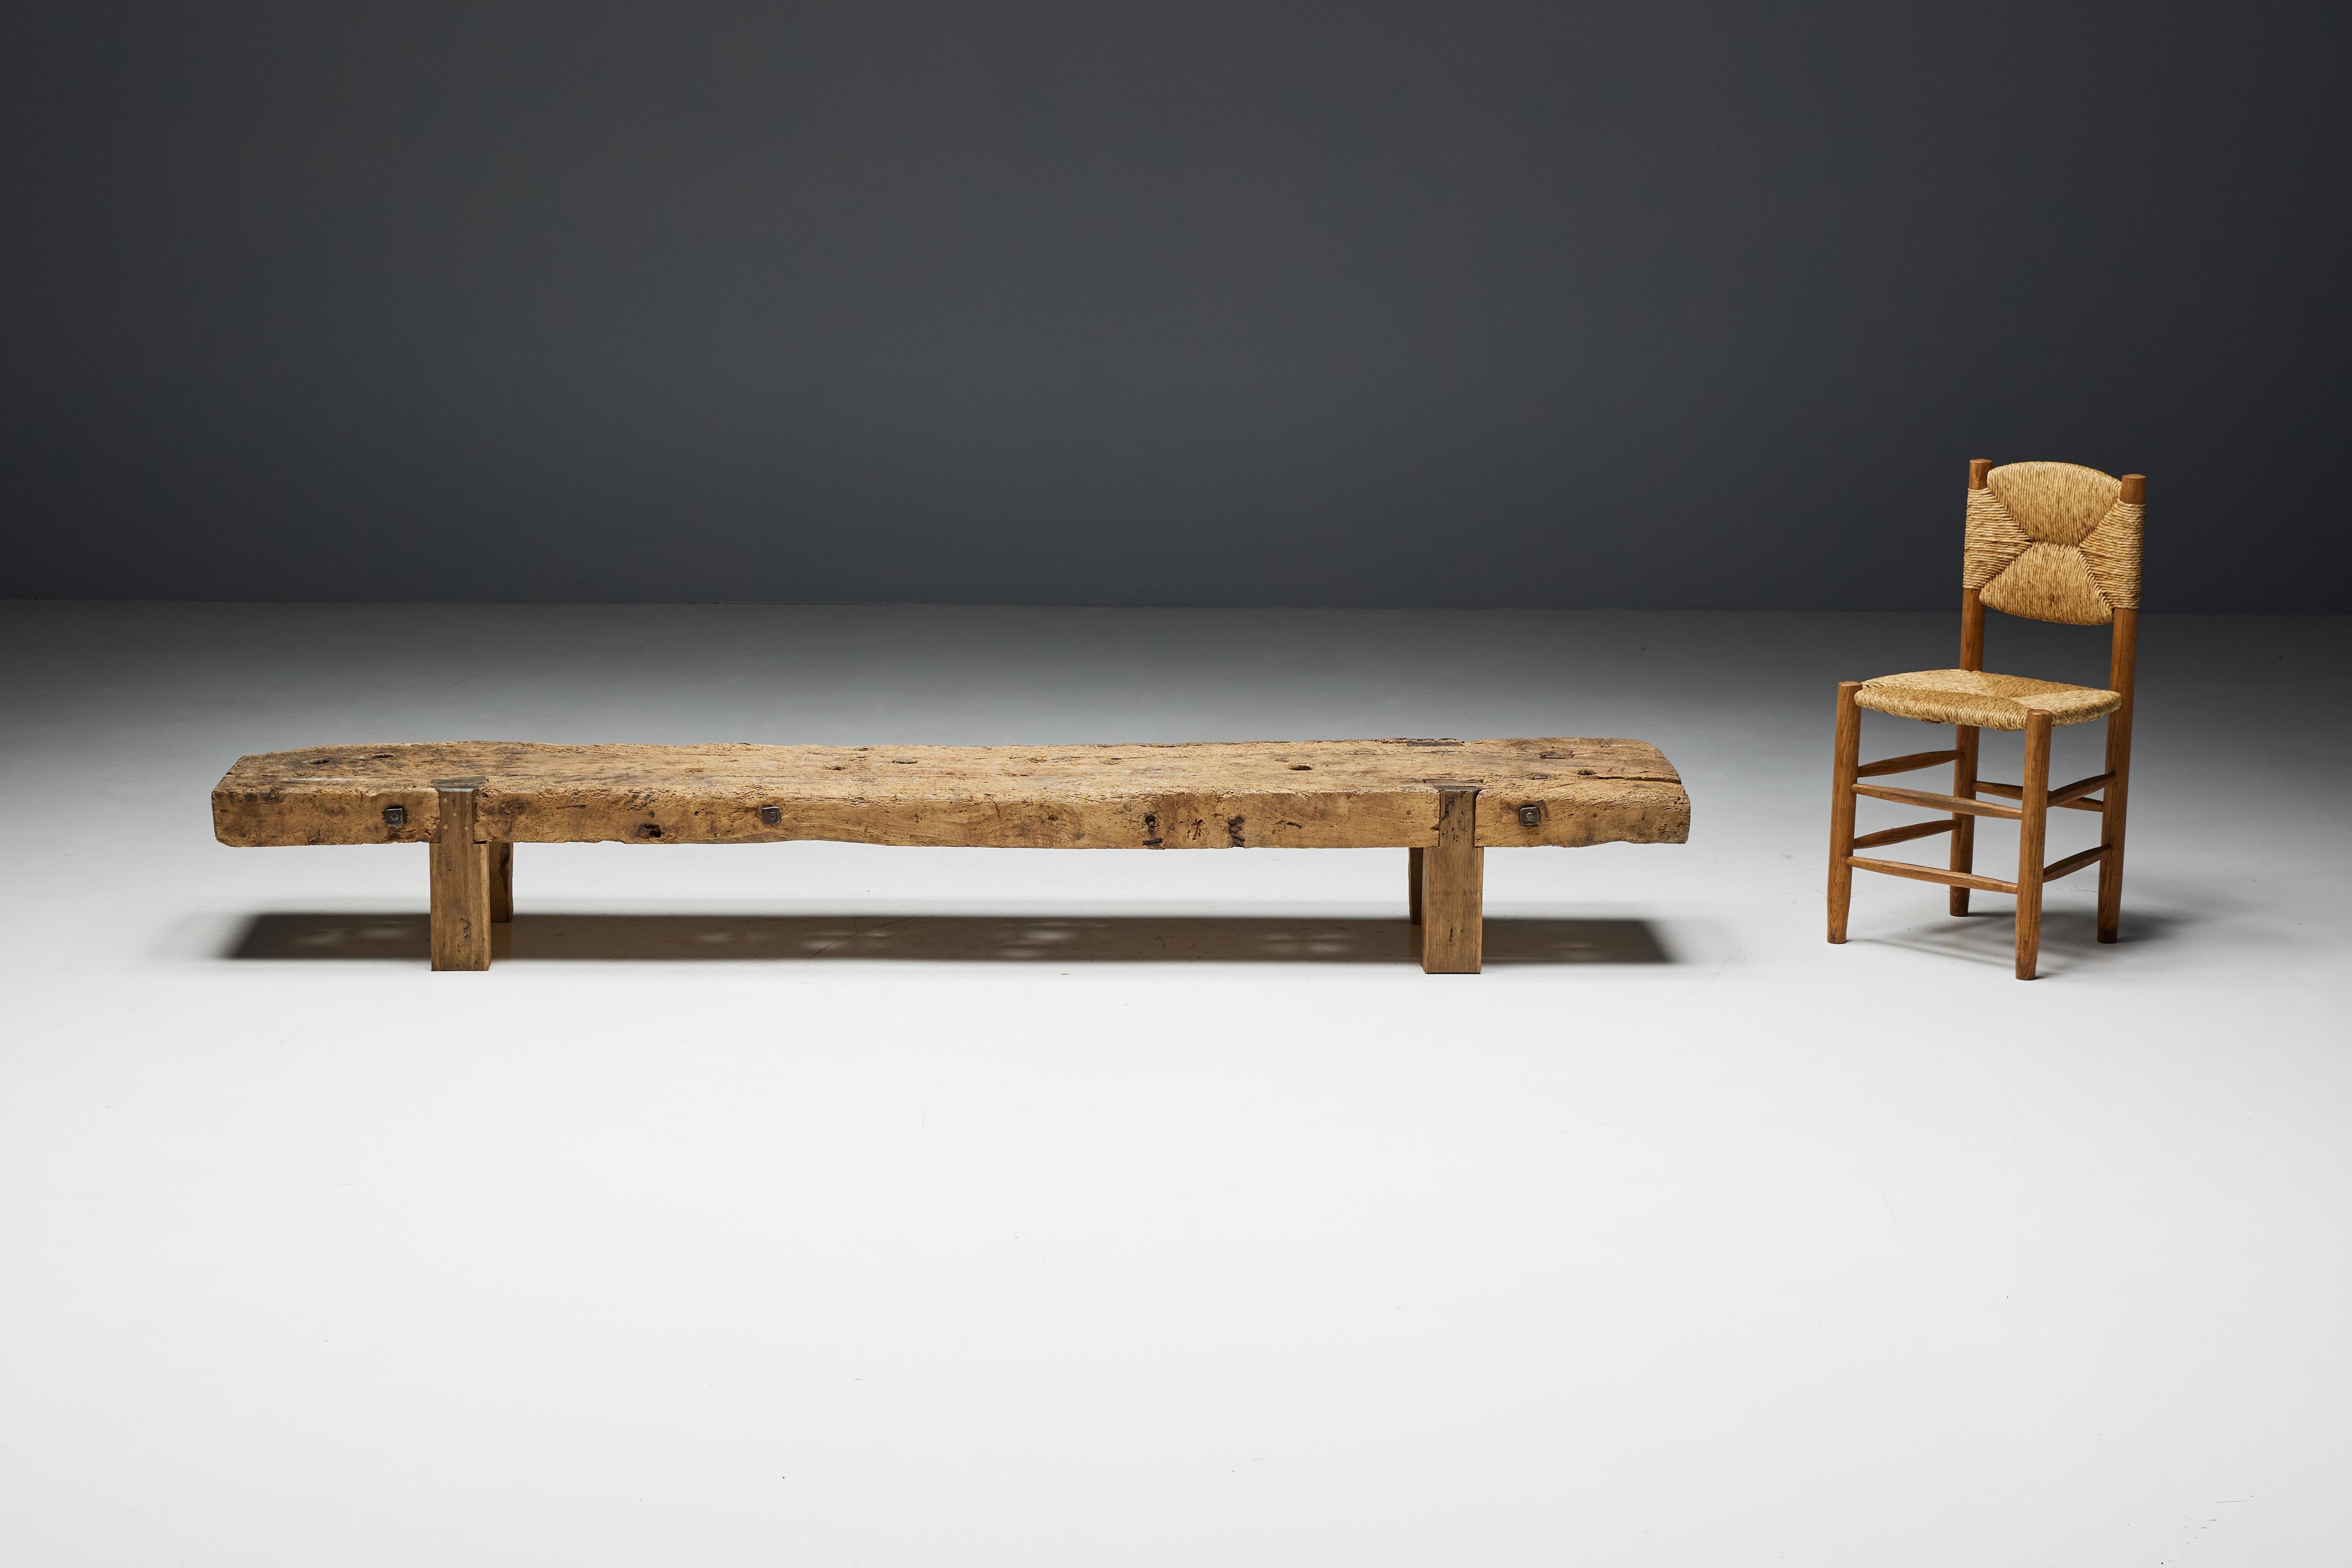 Primitive rustic bench or coffee table made of sturdy wood with a weathered finish. The natural wear of the wood over the years has created a unique, rustic look that adds character and depth to the bench. The generous size of this bench also allows